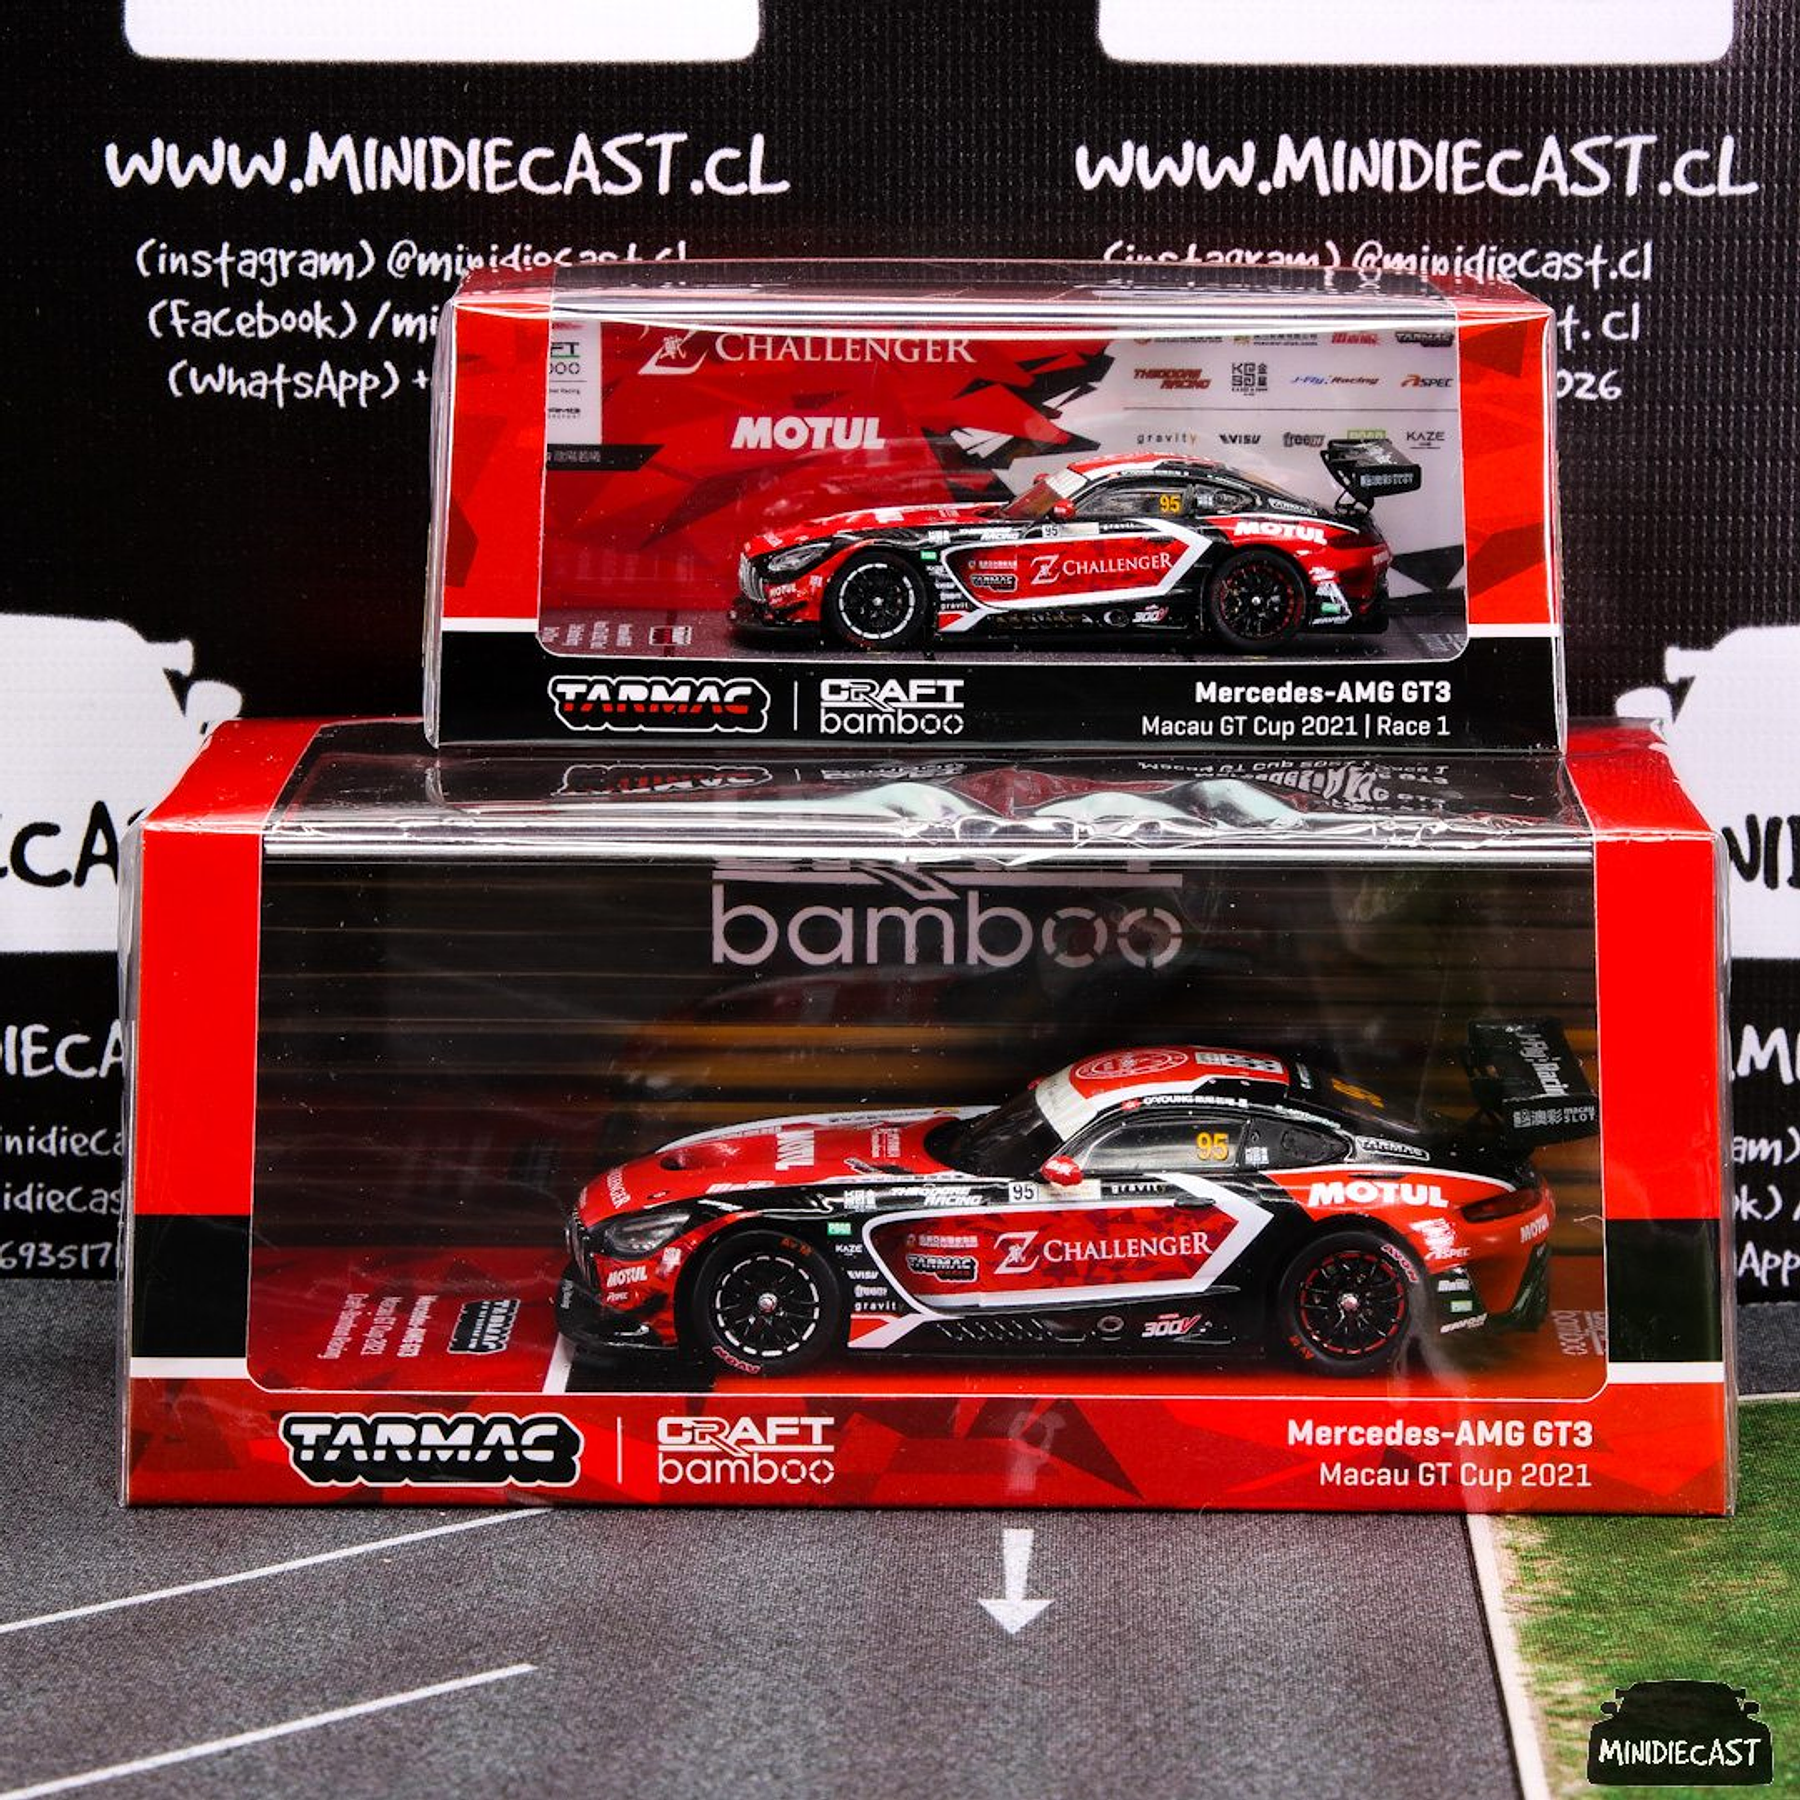 Tarmac Works 1:64 Mercedes-AMG GT3 Macau GT Cup 2021 - Race 1 Craft-Bamboo Racing Darryl O'Young - Officially licensed by Mercedes-Benz